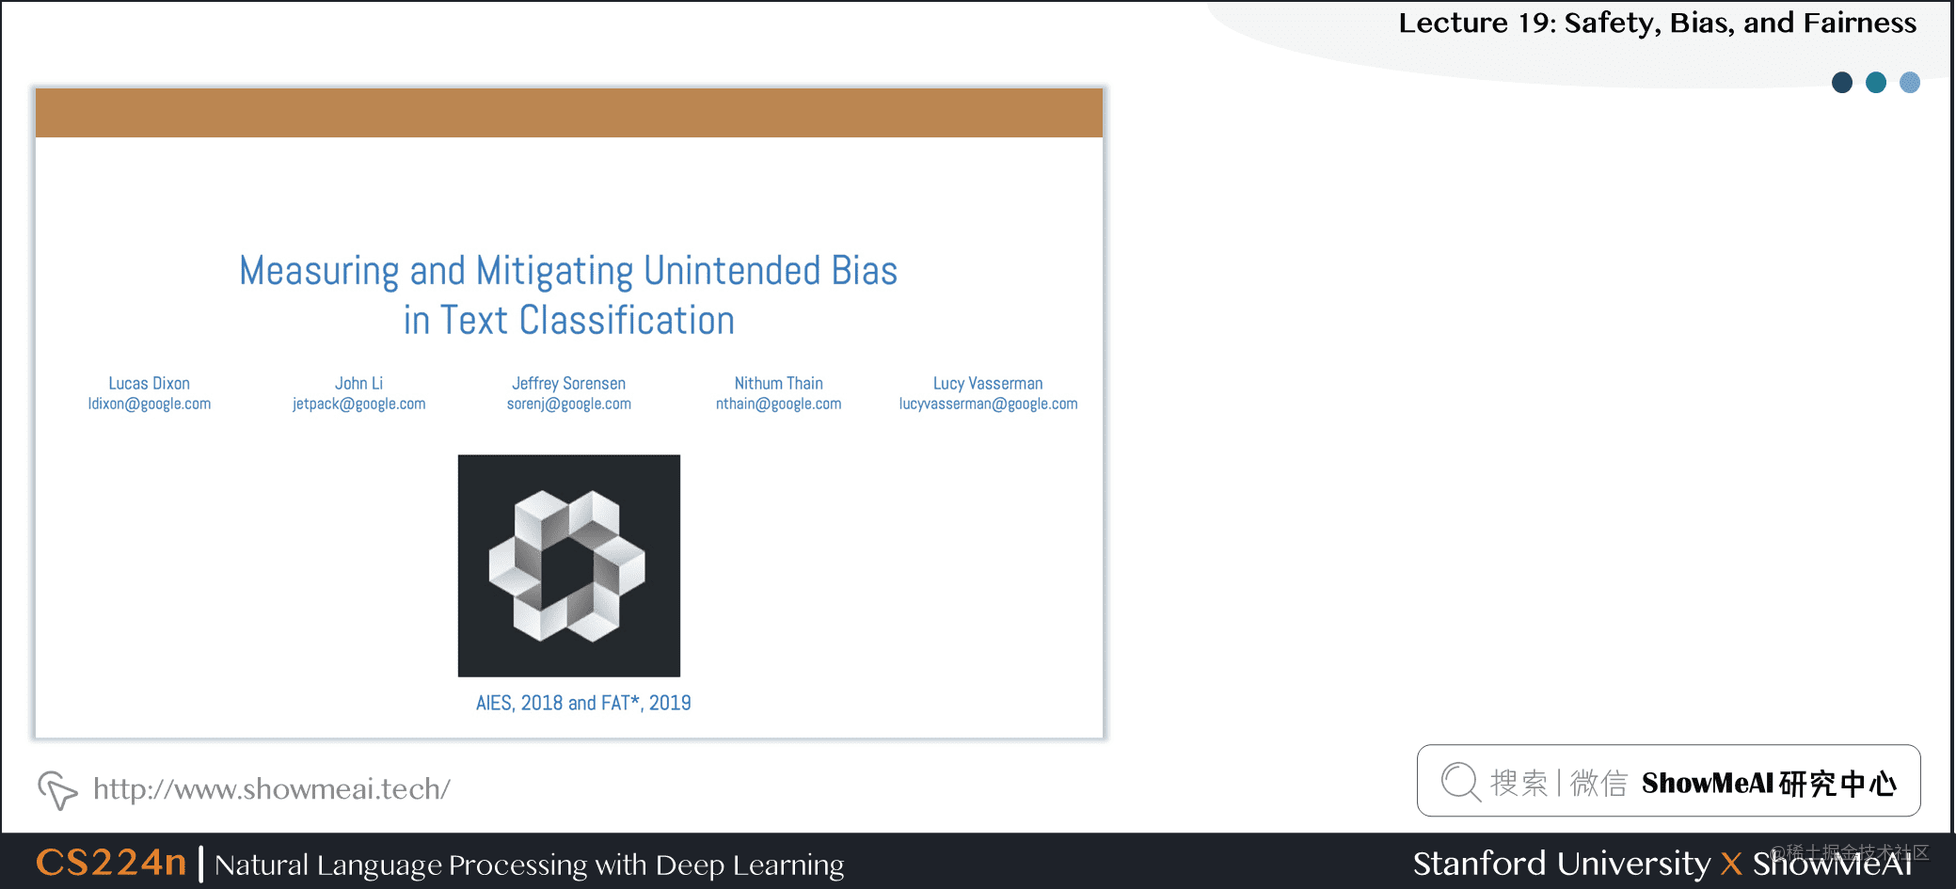 Measuring and Mitigating Unintended Bias in Text Classification